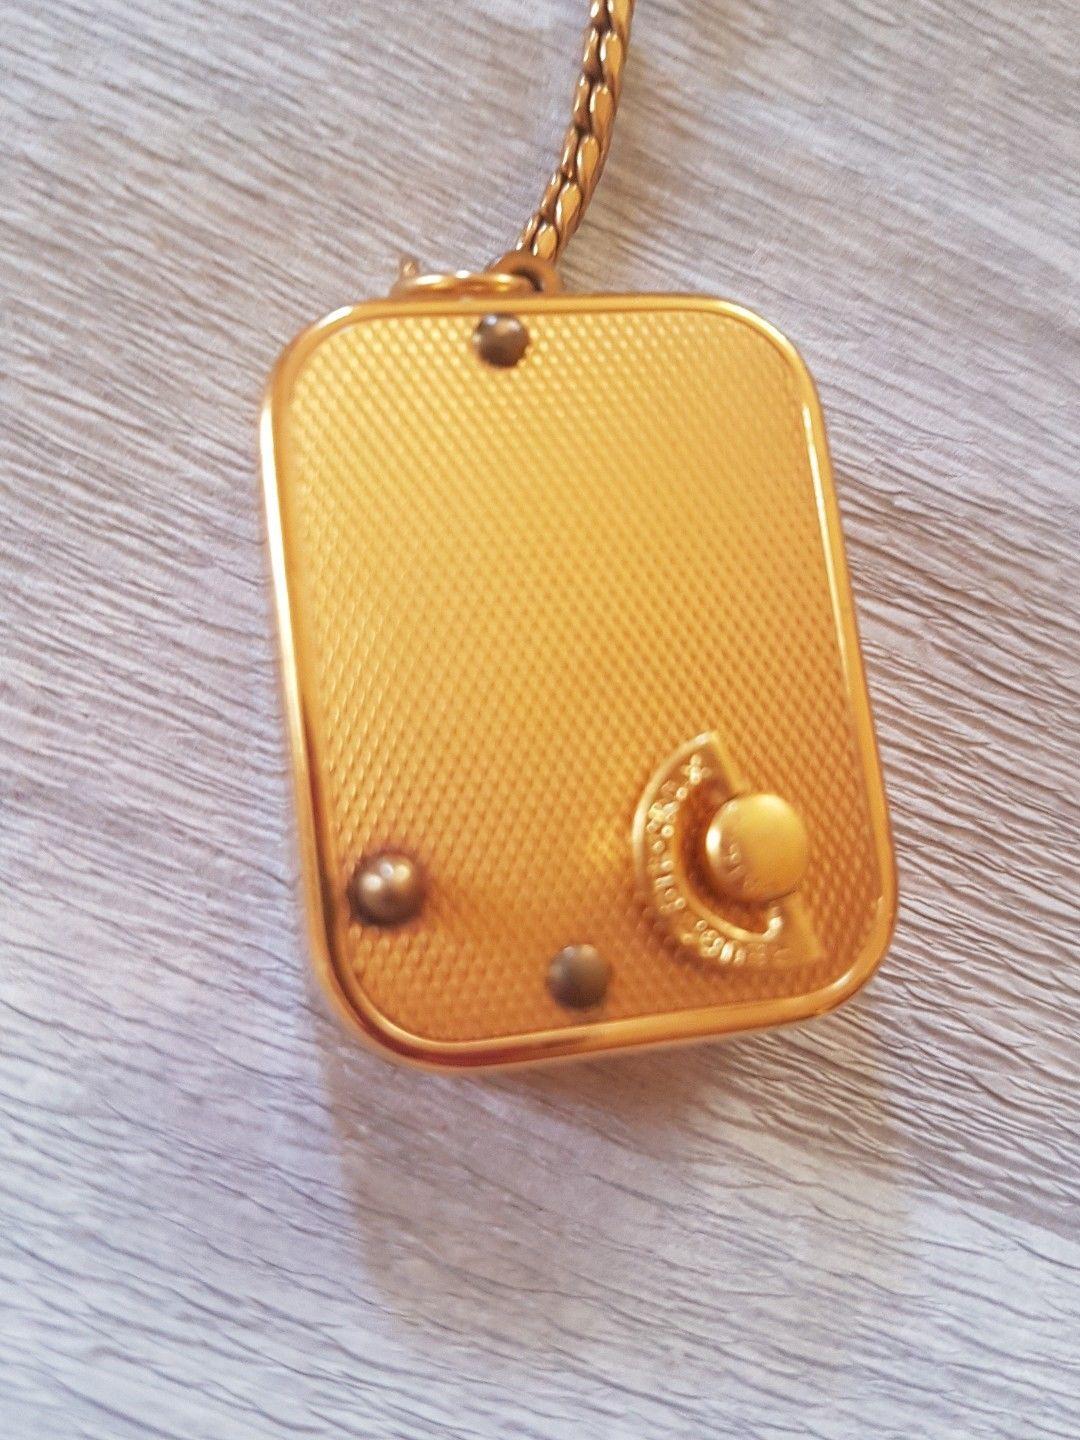 Rare Authentic Hermes Keychain

It is also a music box !

Turn the mecanic key (at the back) clockwise and go up the small button to hear the music 

Made by Reuge, seller of music boxes, located in Sainte Croix, Swiss

